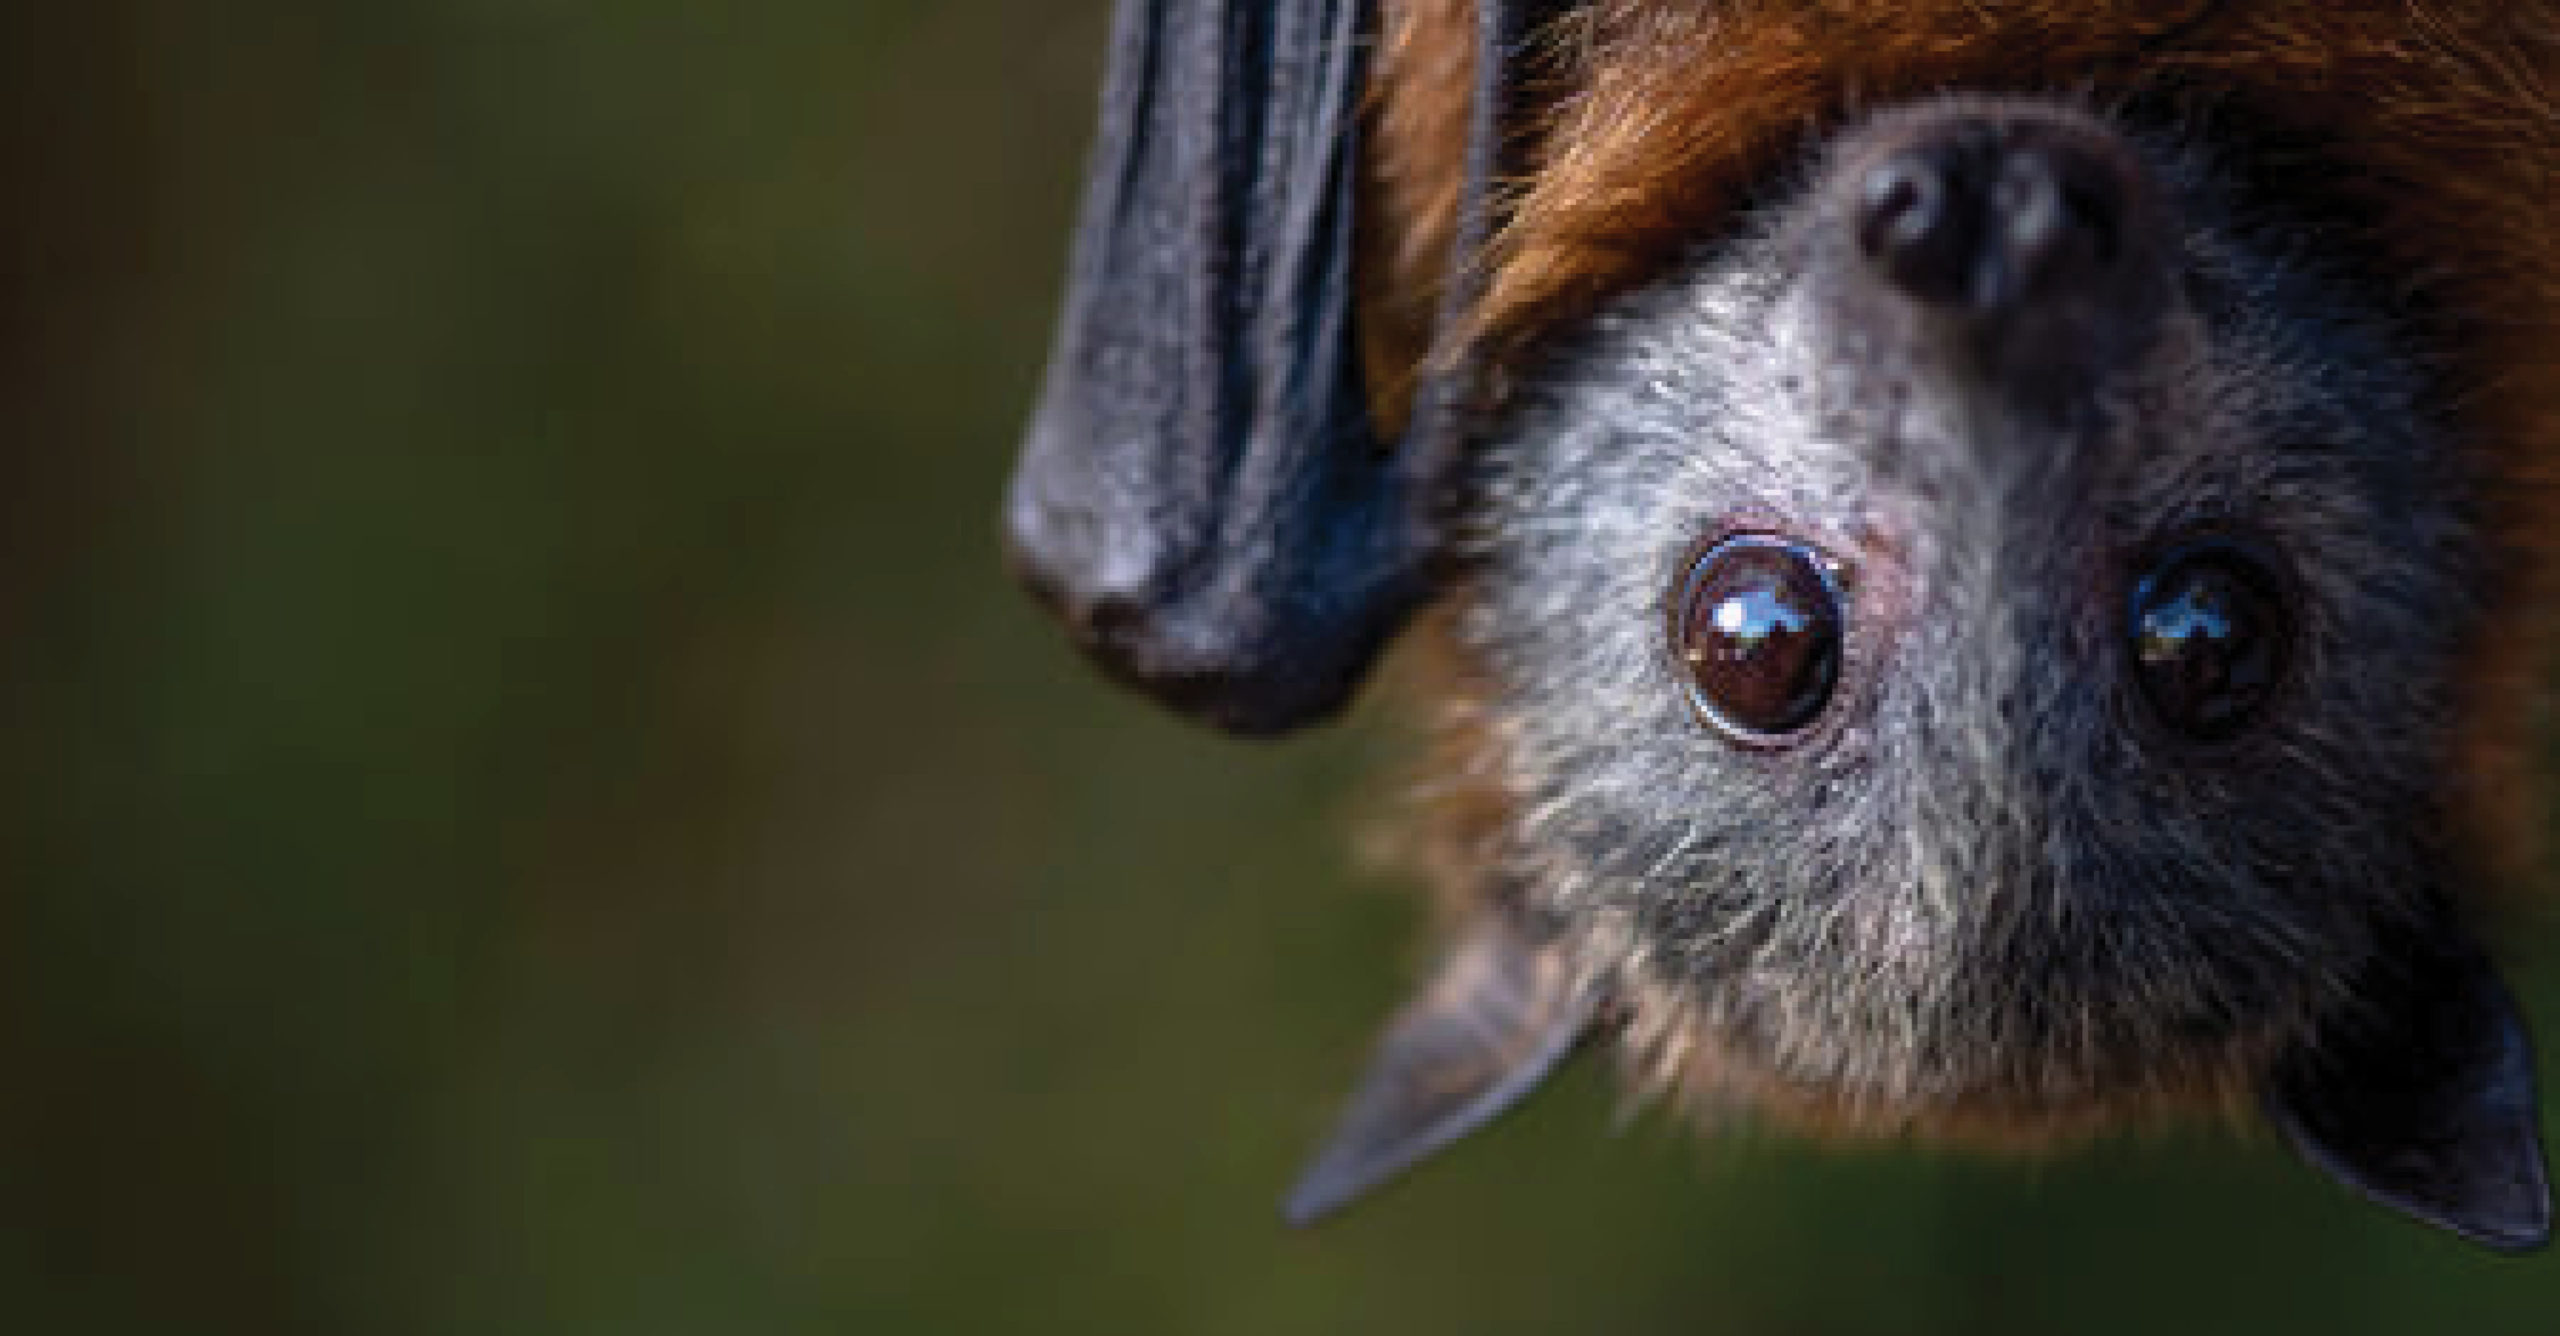 the amazing world of bats with Miss Michelle